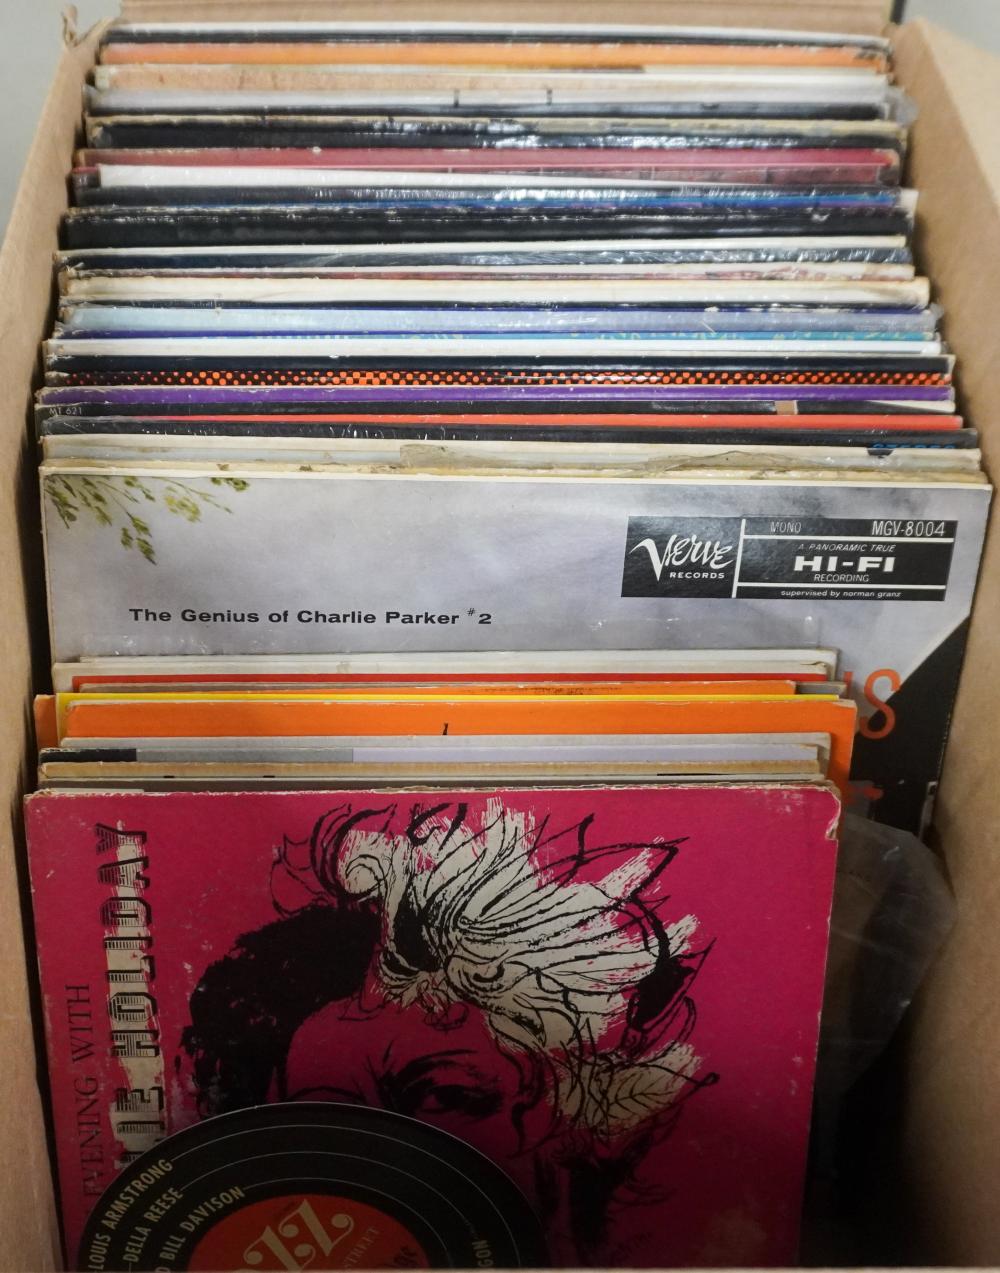 COLLECTION OF JAZZ AND OTHER RECORDSCollection